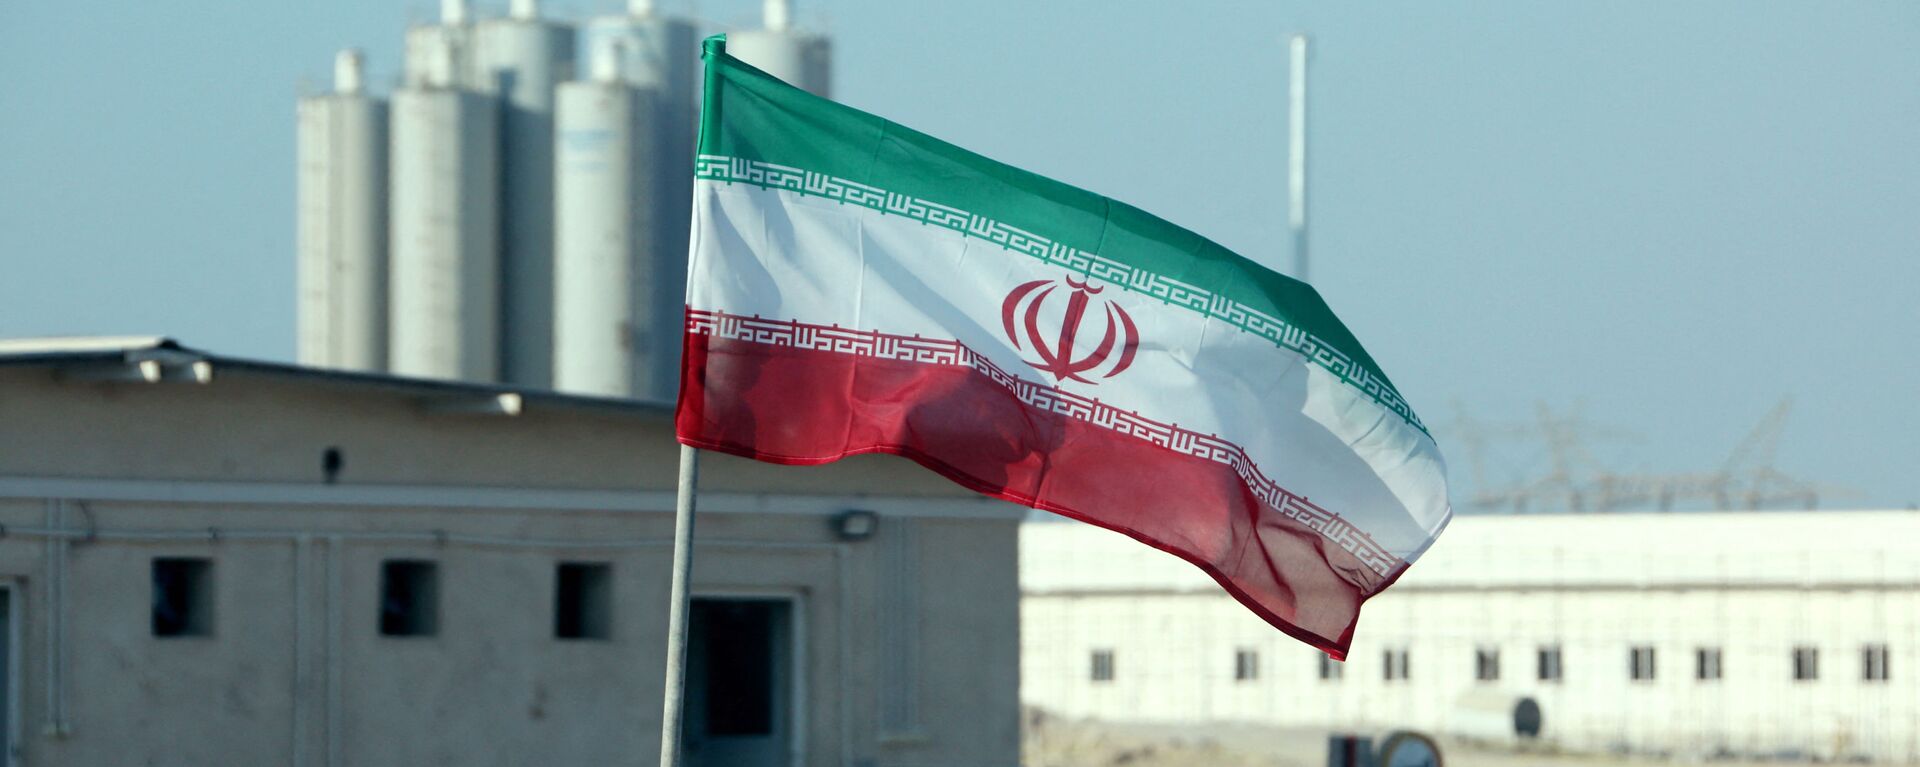 A picture taken on November 10, 2019, shows an Iranian flag in Iran's Bushehr nuclear power plant, during an official ceremony to kick-start works on a second reactor at the facility - Sputnik International, 1920, 19.03.2022